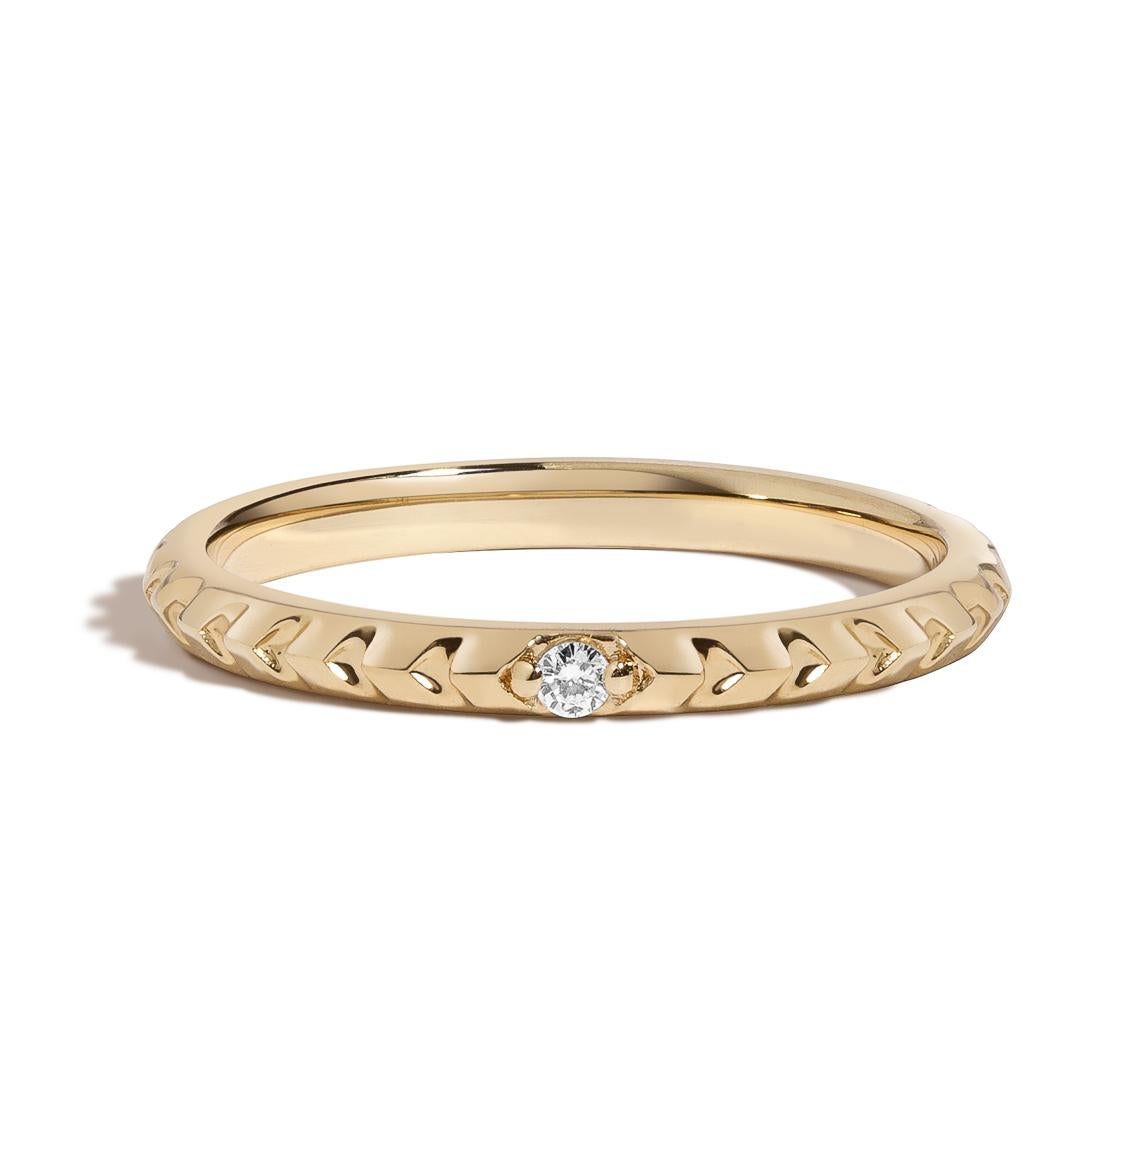 Brilliant Cut Clea Ring, Textured Yellow Gold Ring with Diamond For Sale